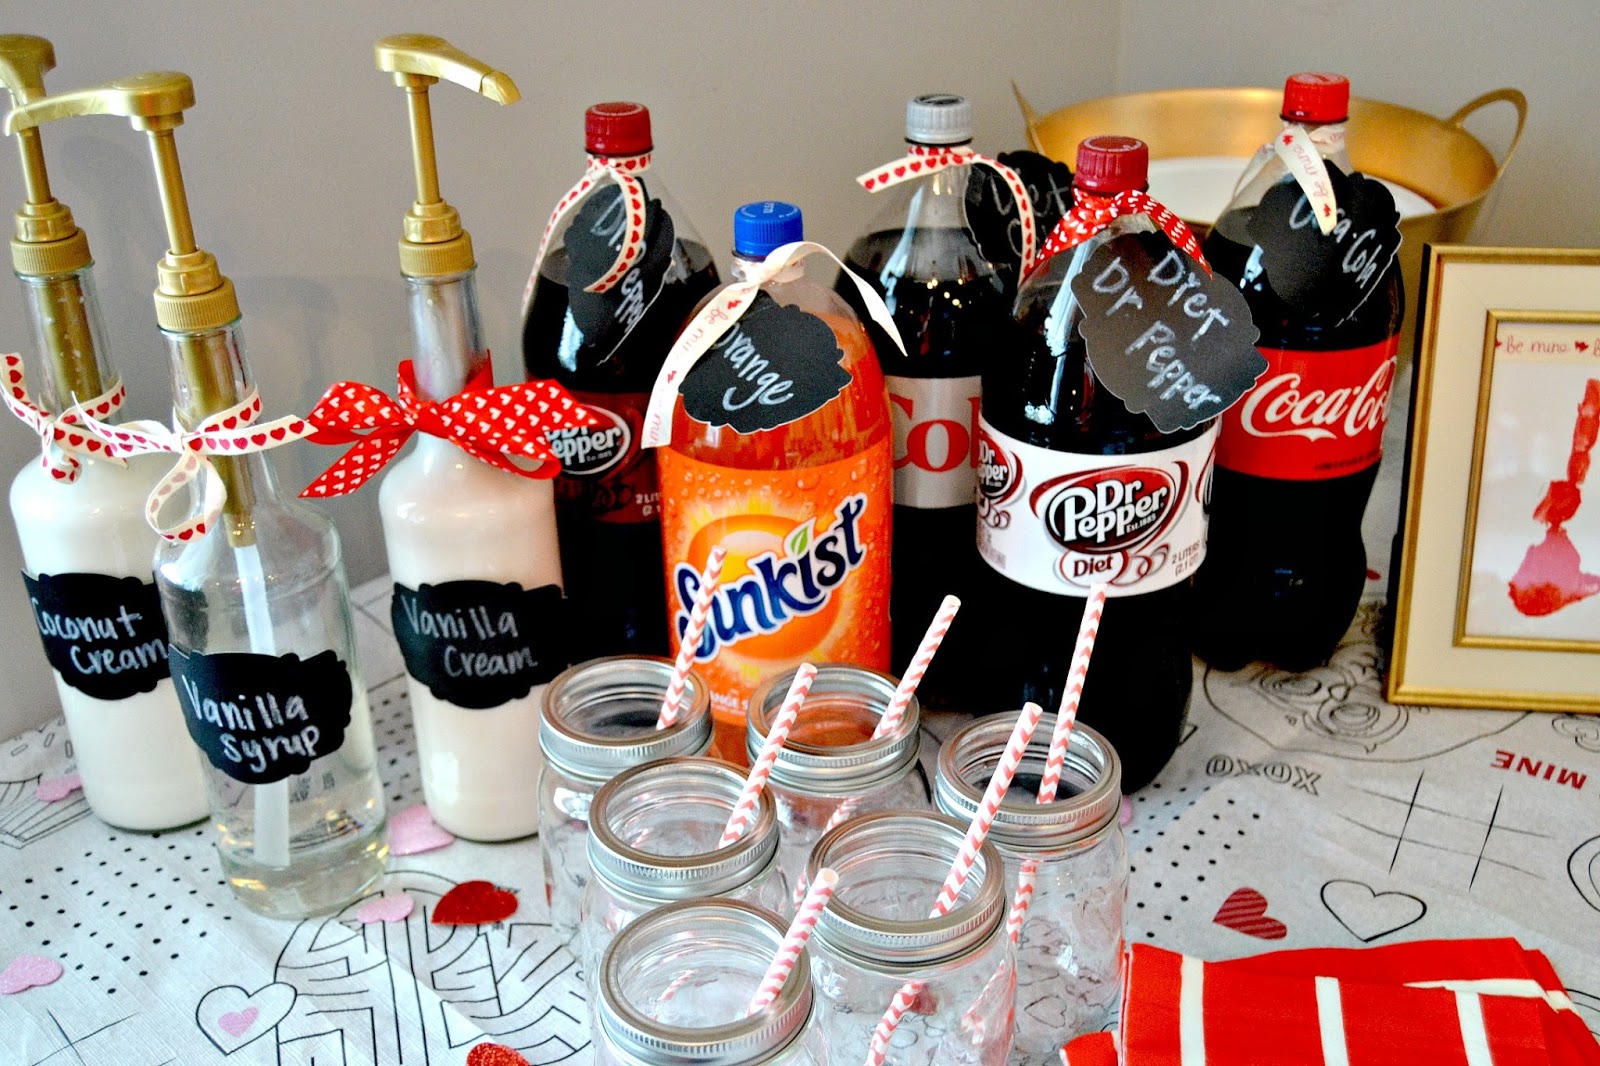 Fun Valentine's Day Party Ideas on a Budget - Fun Cheap or Free